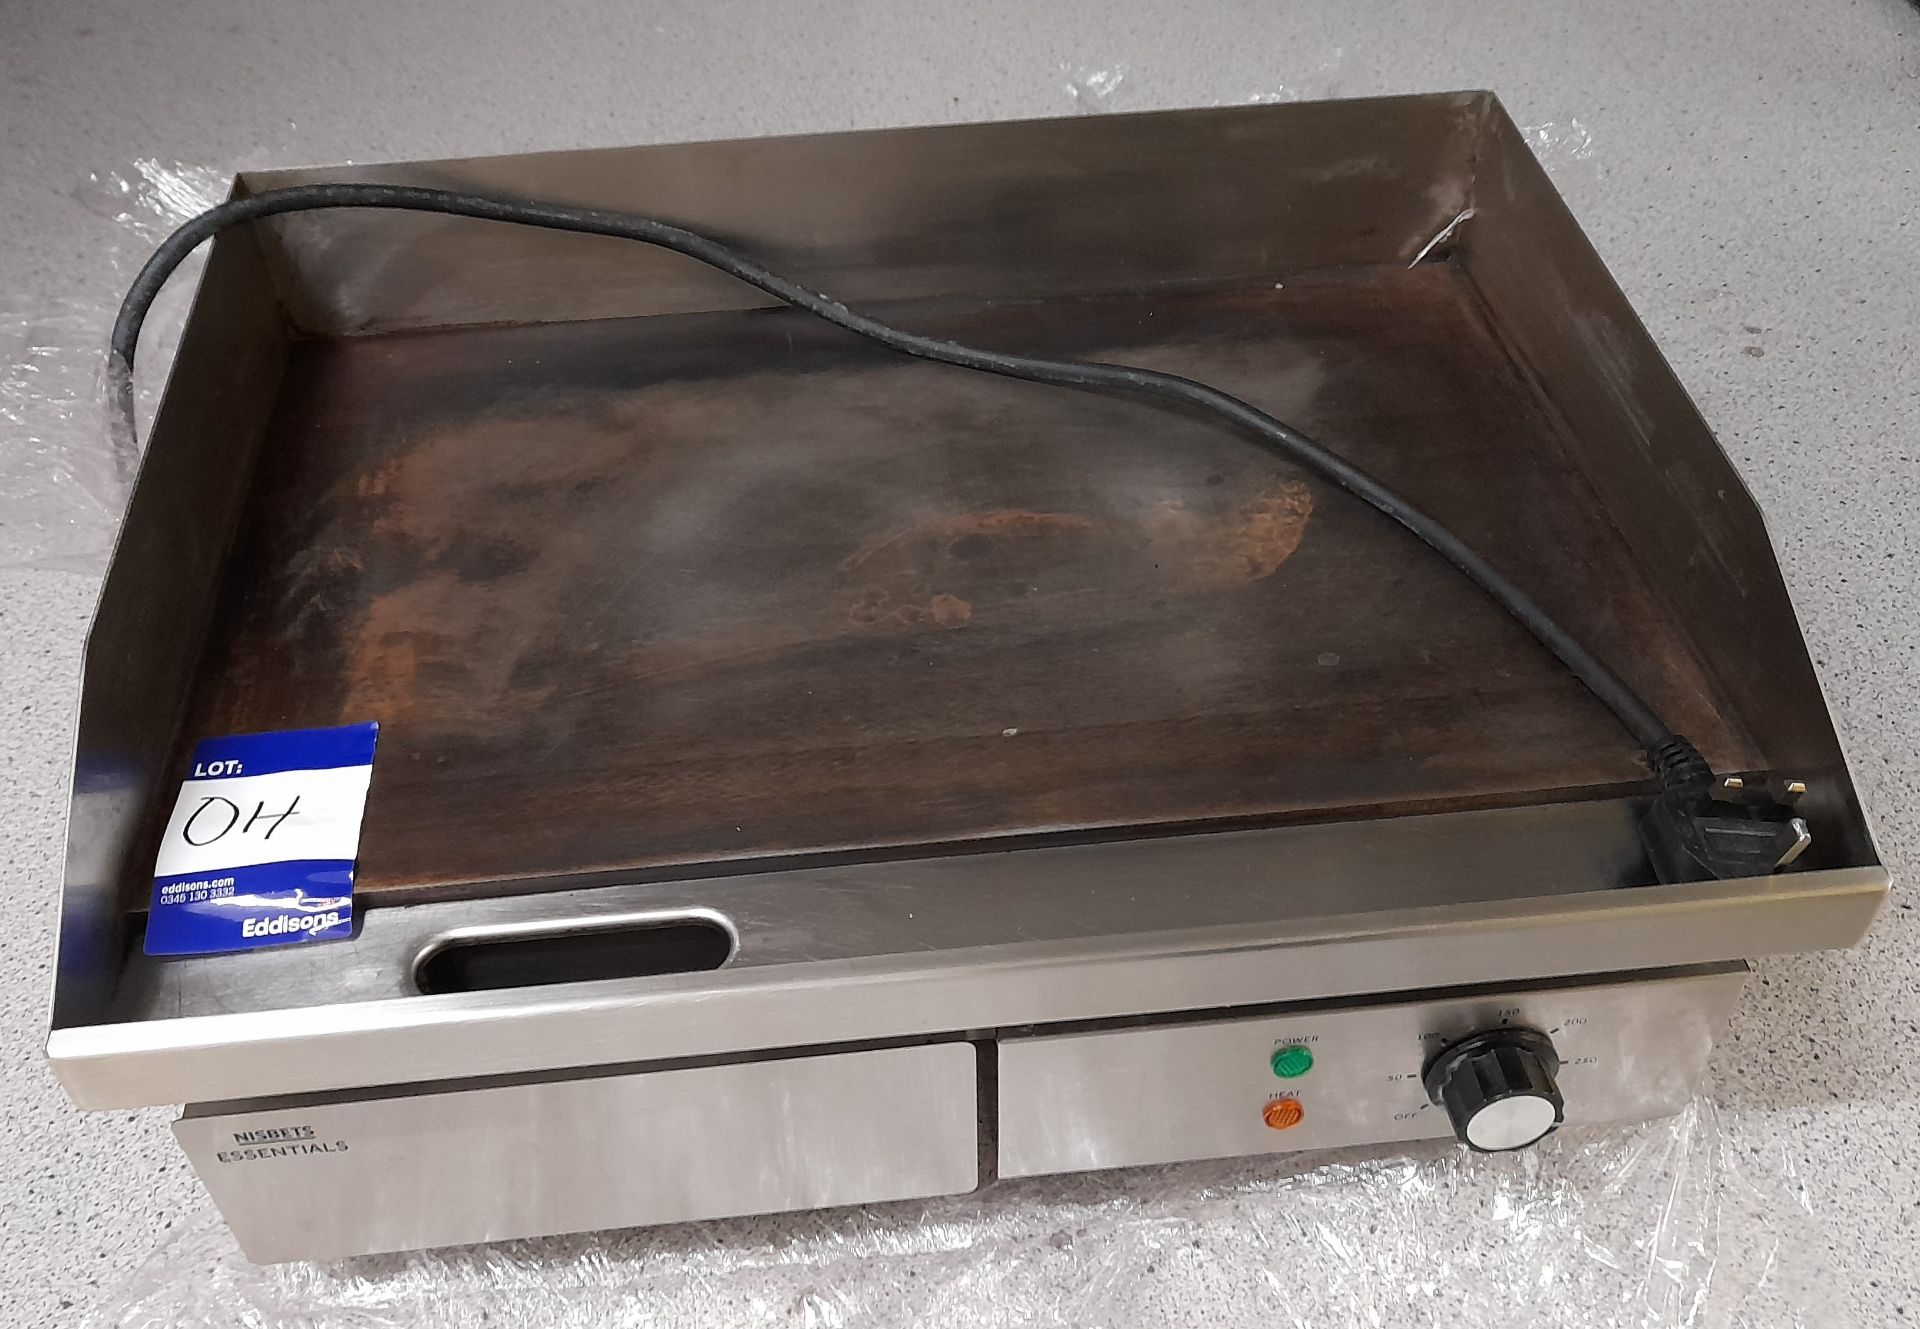 Nisbets Essentials DA397 Counter-top griddle, Serial Number 397202205000801 – Located Manchester